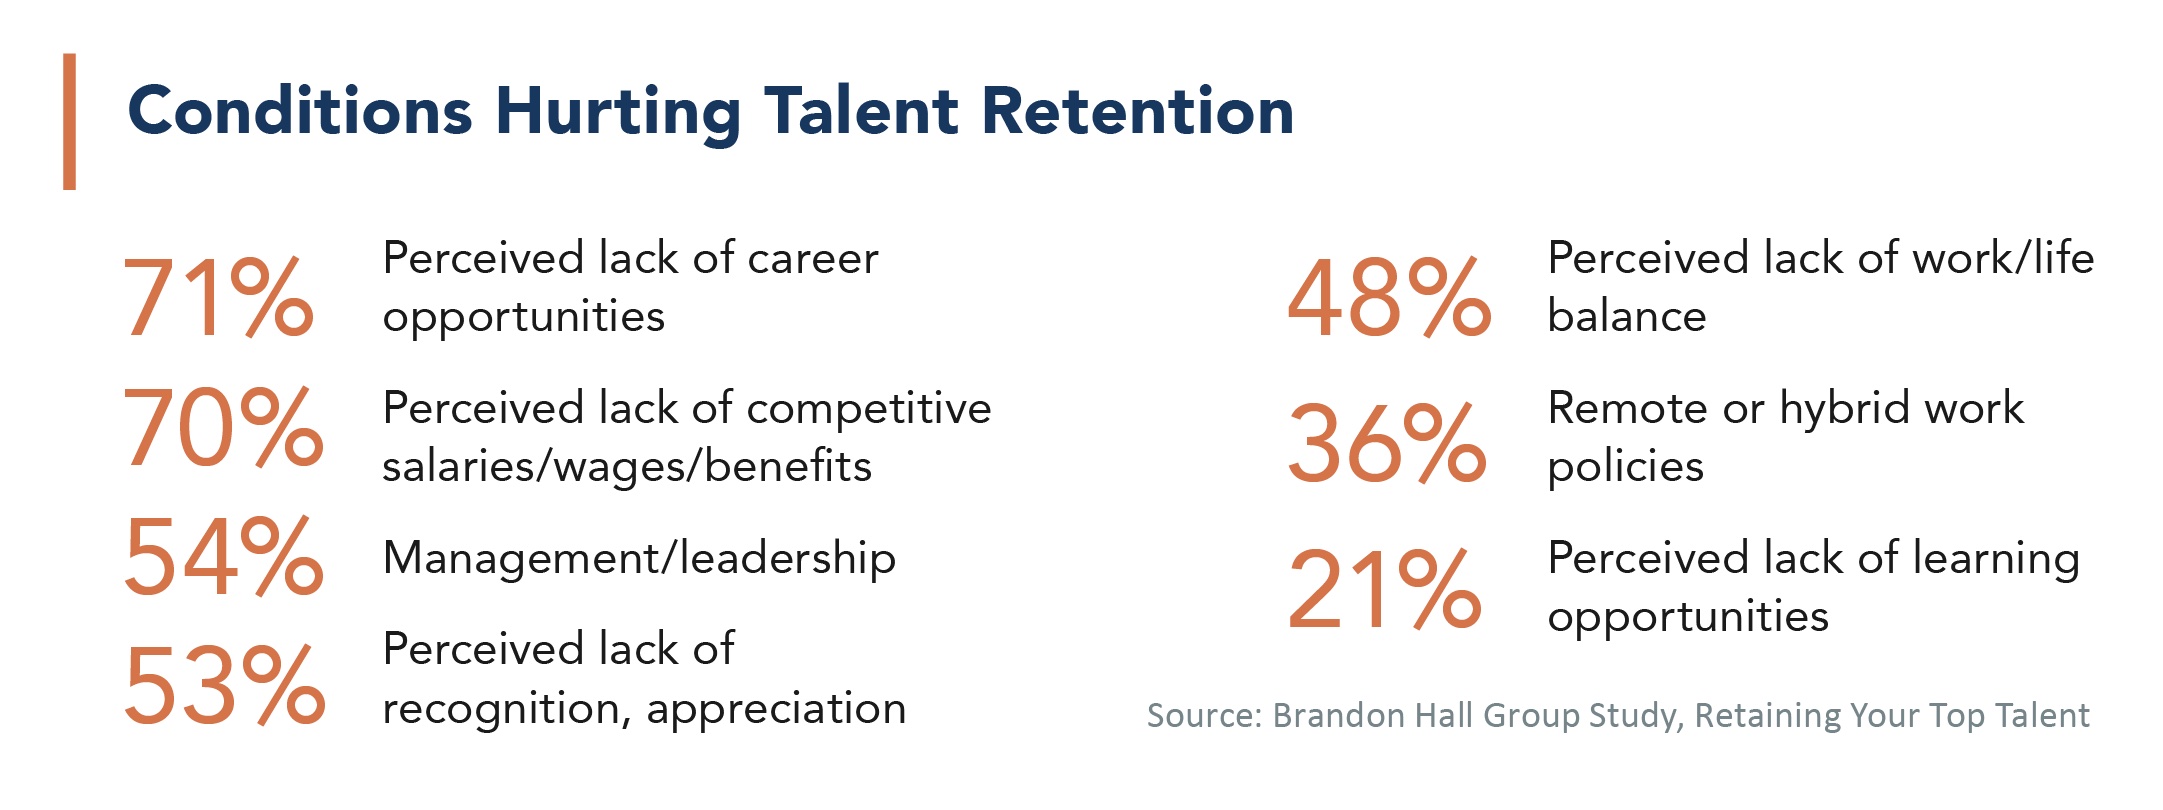 Conditions hurting talent retention.